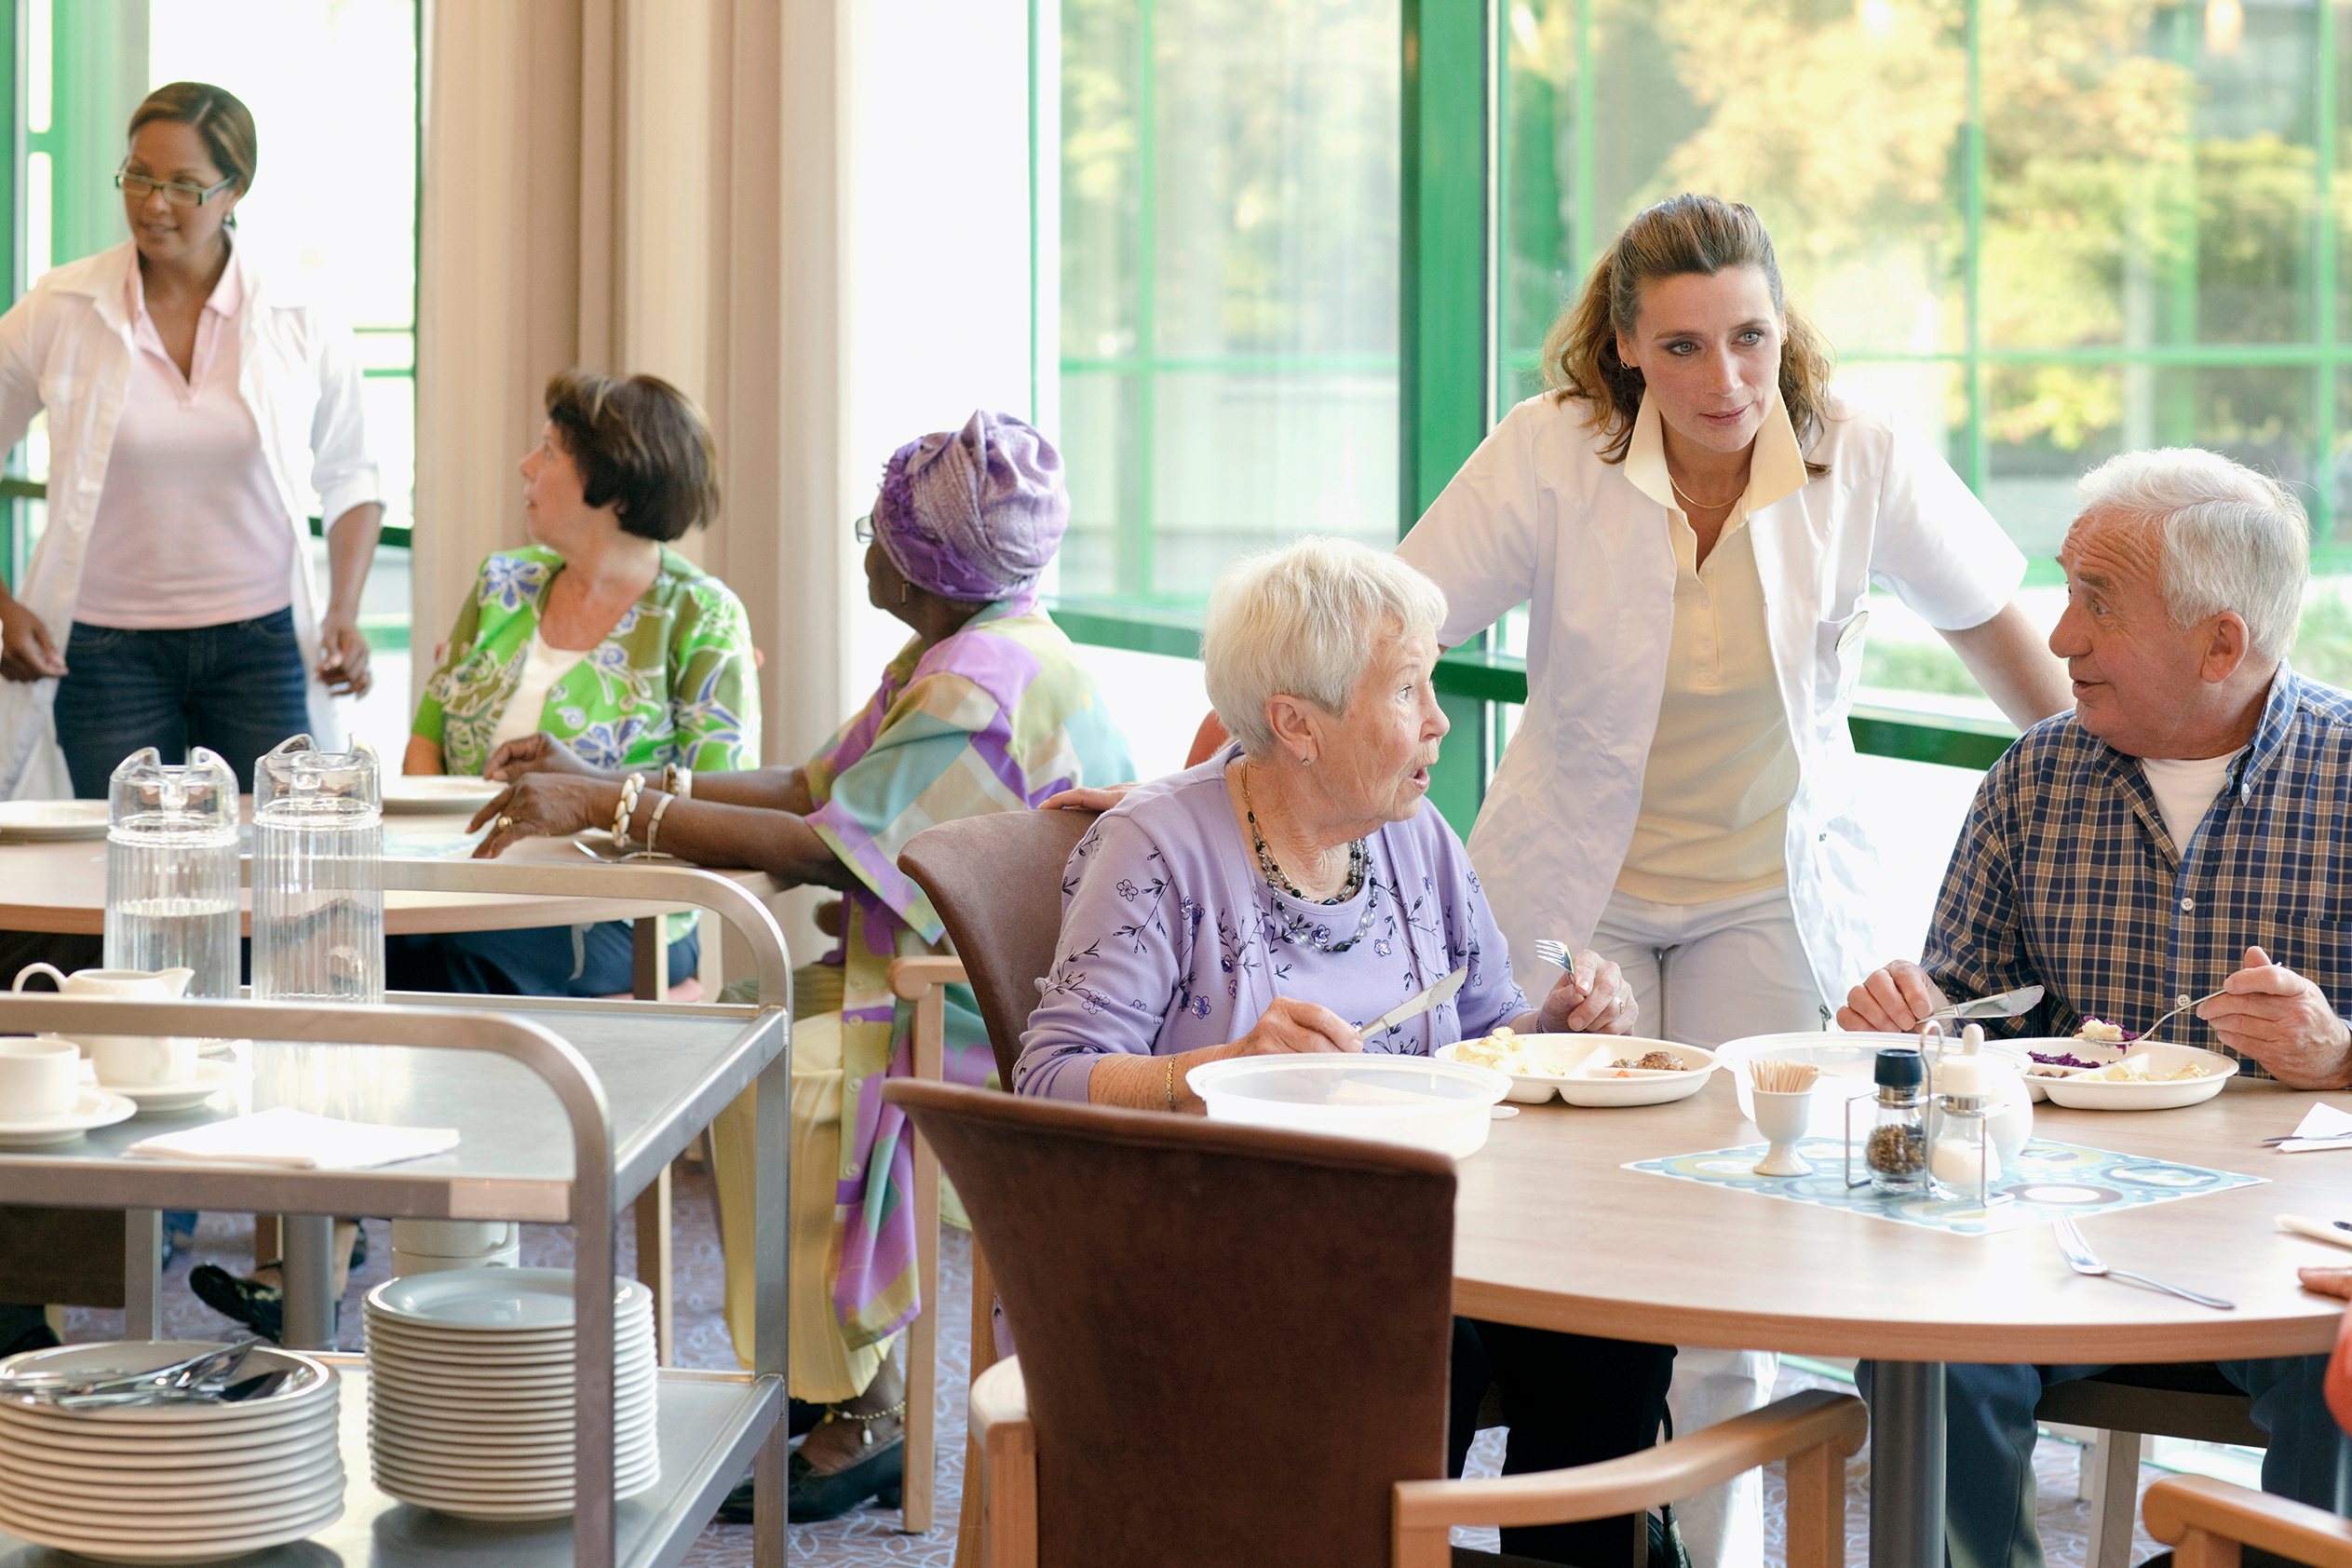 New resources to improve food, dining and nutrition within the aged care sector